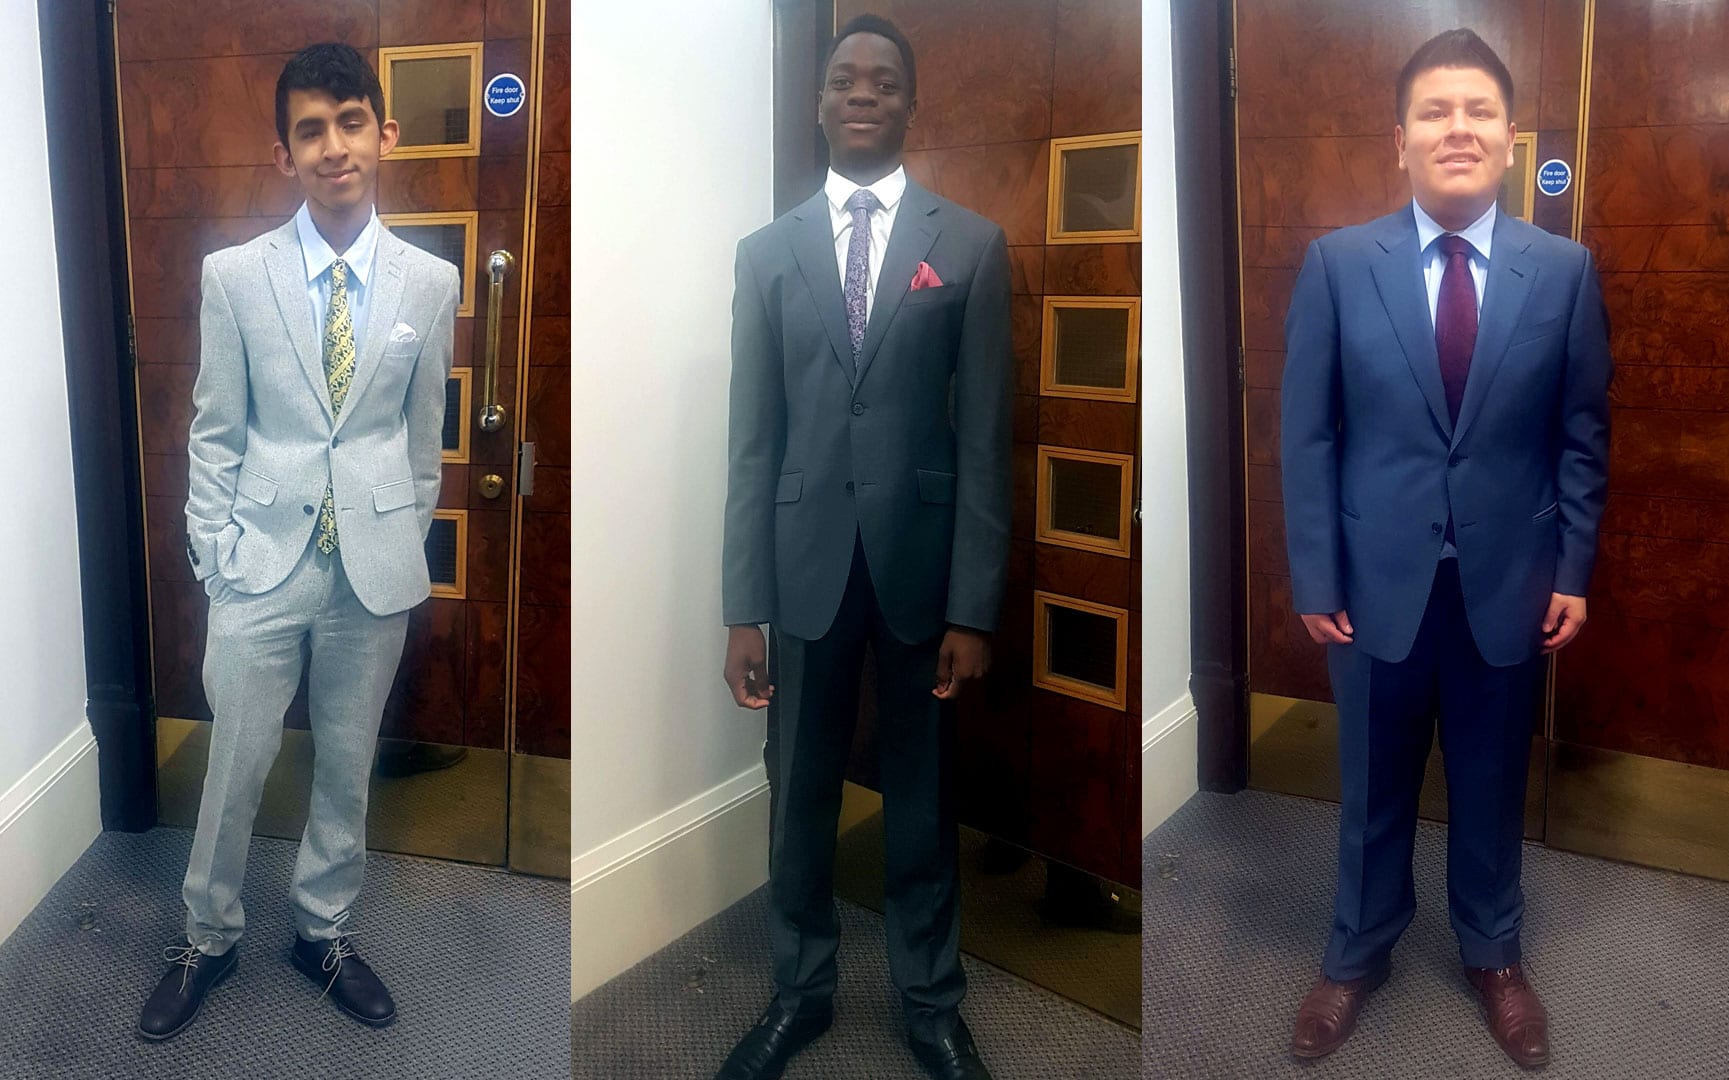 Students Get Suited and Booted